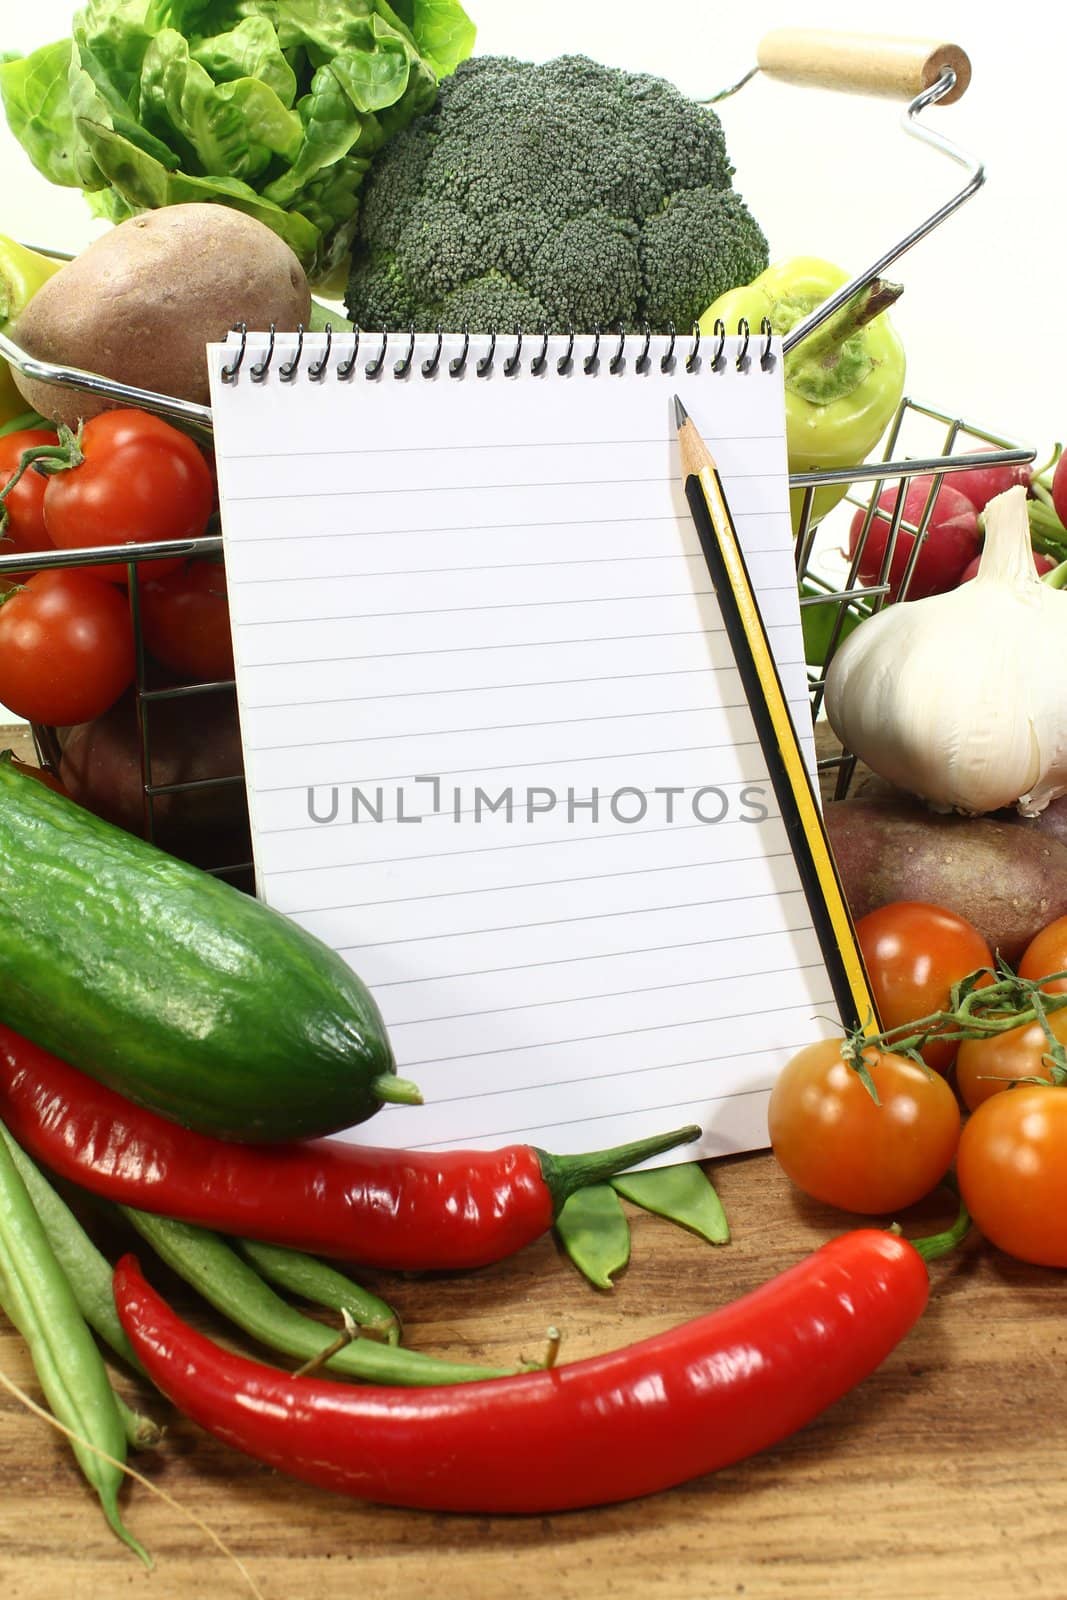 Basket with fresh vegetables, shopping list and pencil on a wooden background